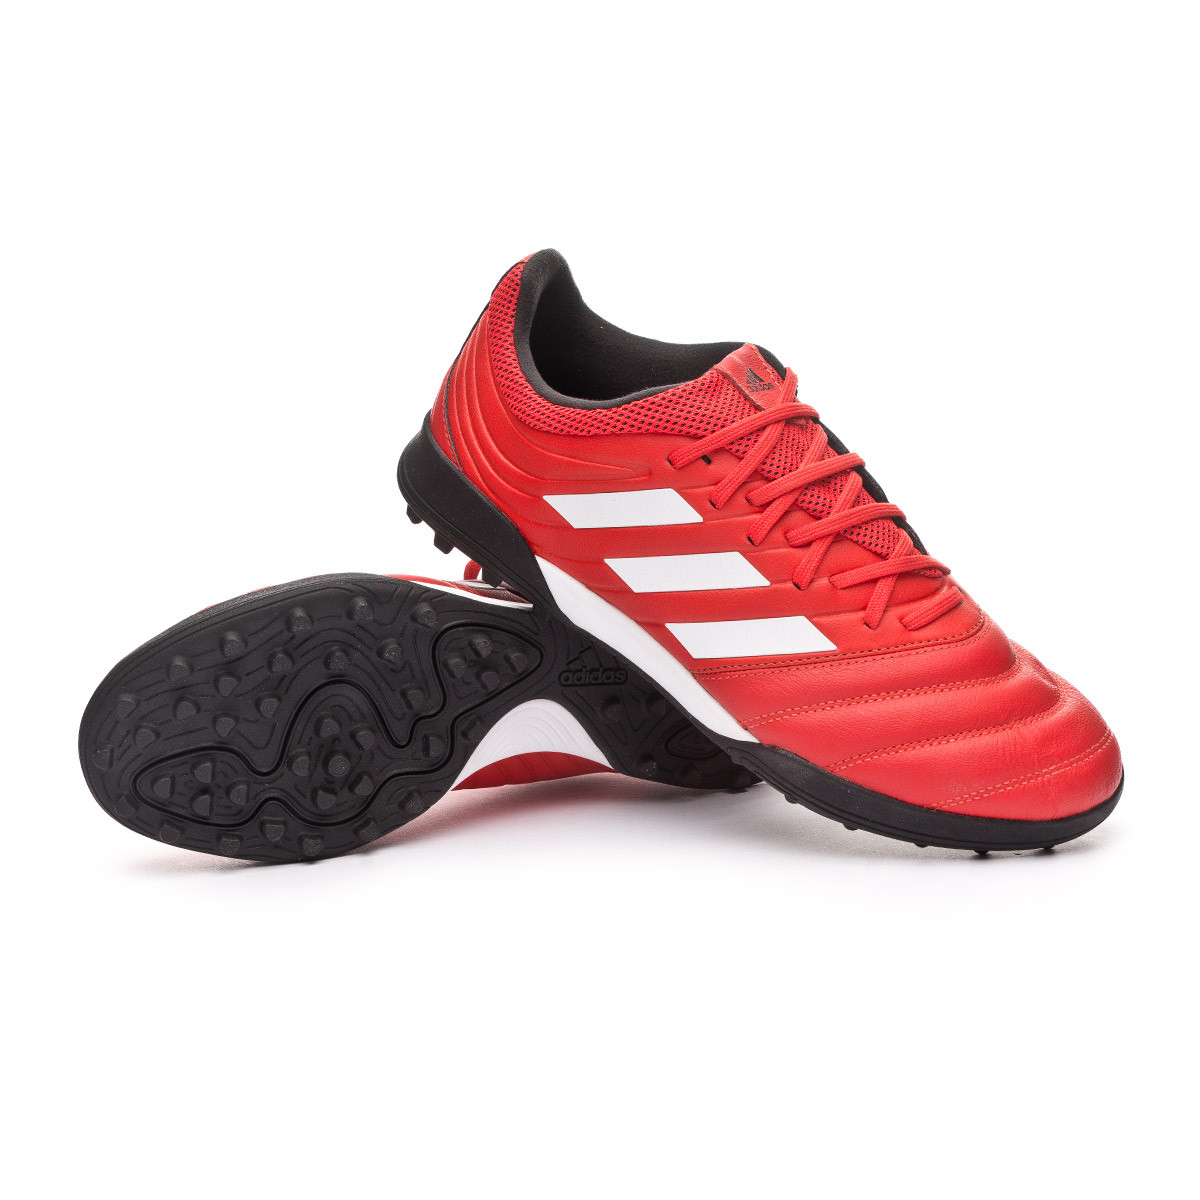 red adidas copa trainers